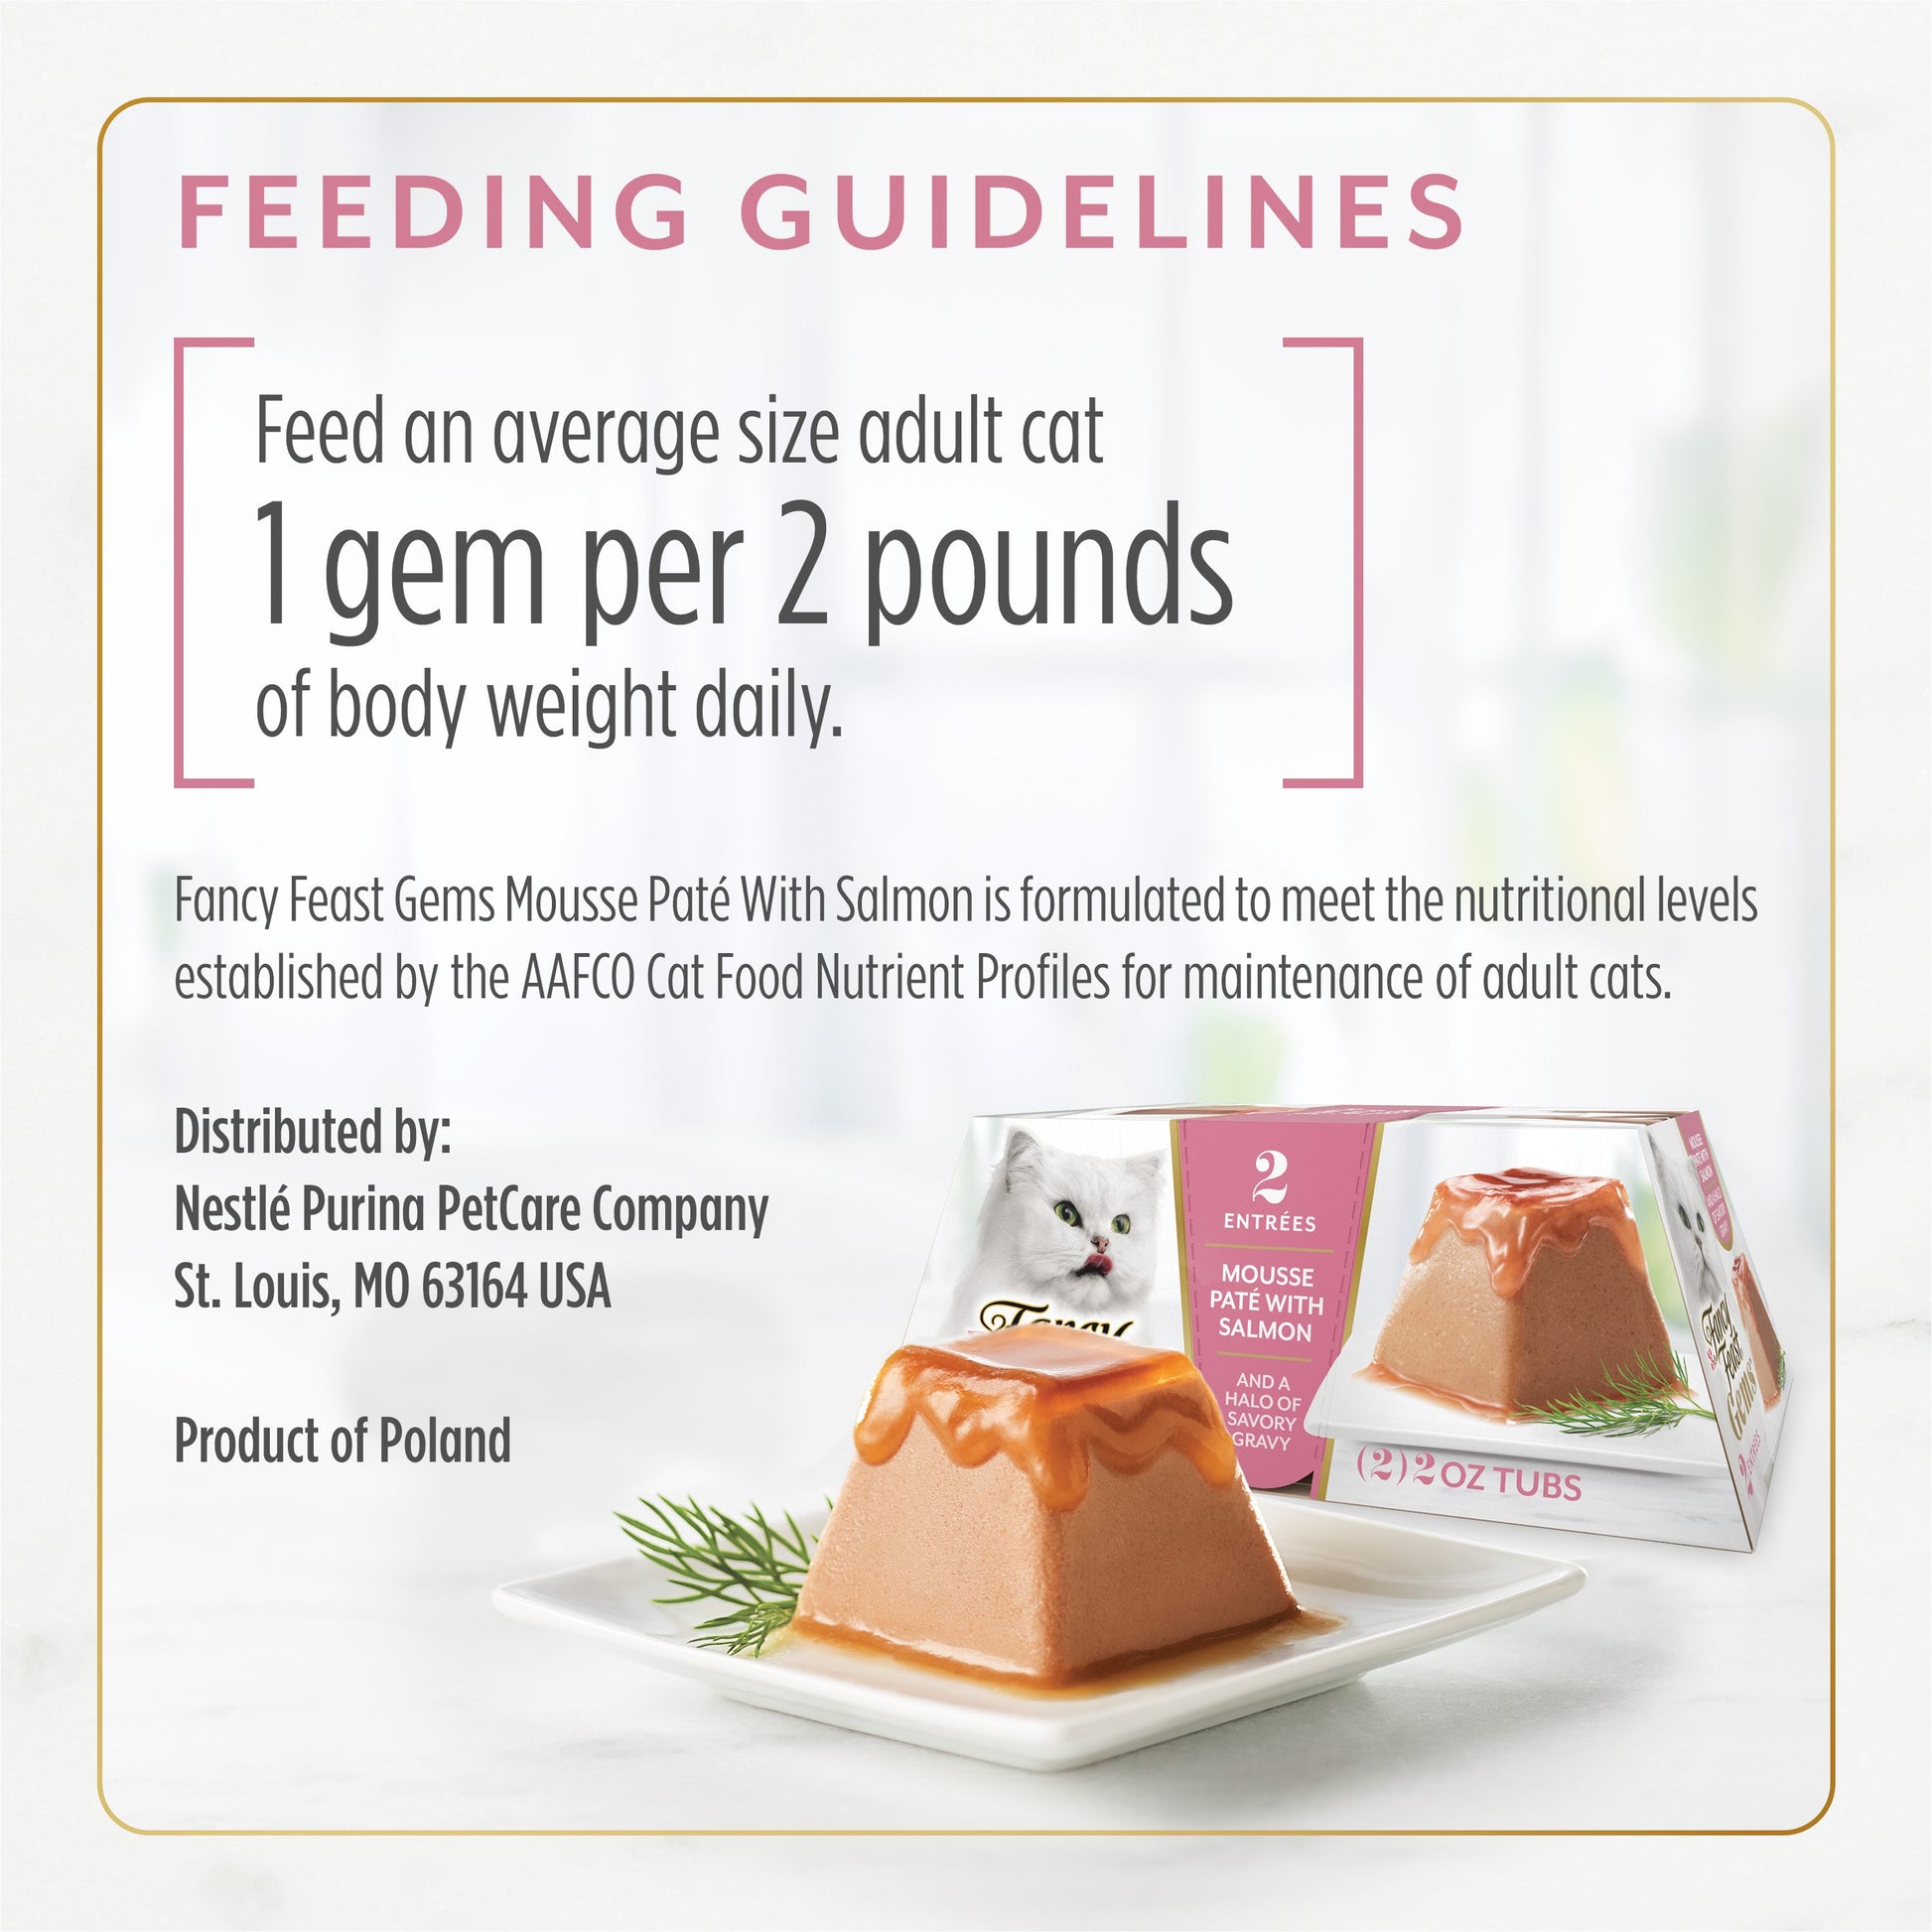 Fancy Feast Gems Mousse Pate with Salmon feeding guidelines